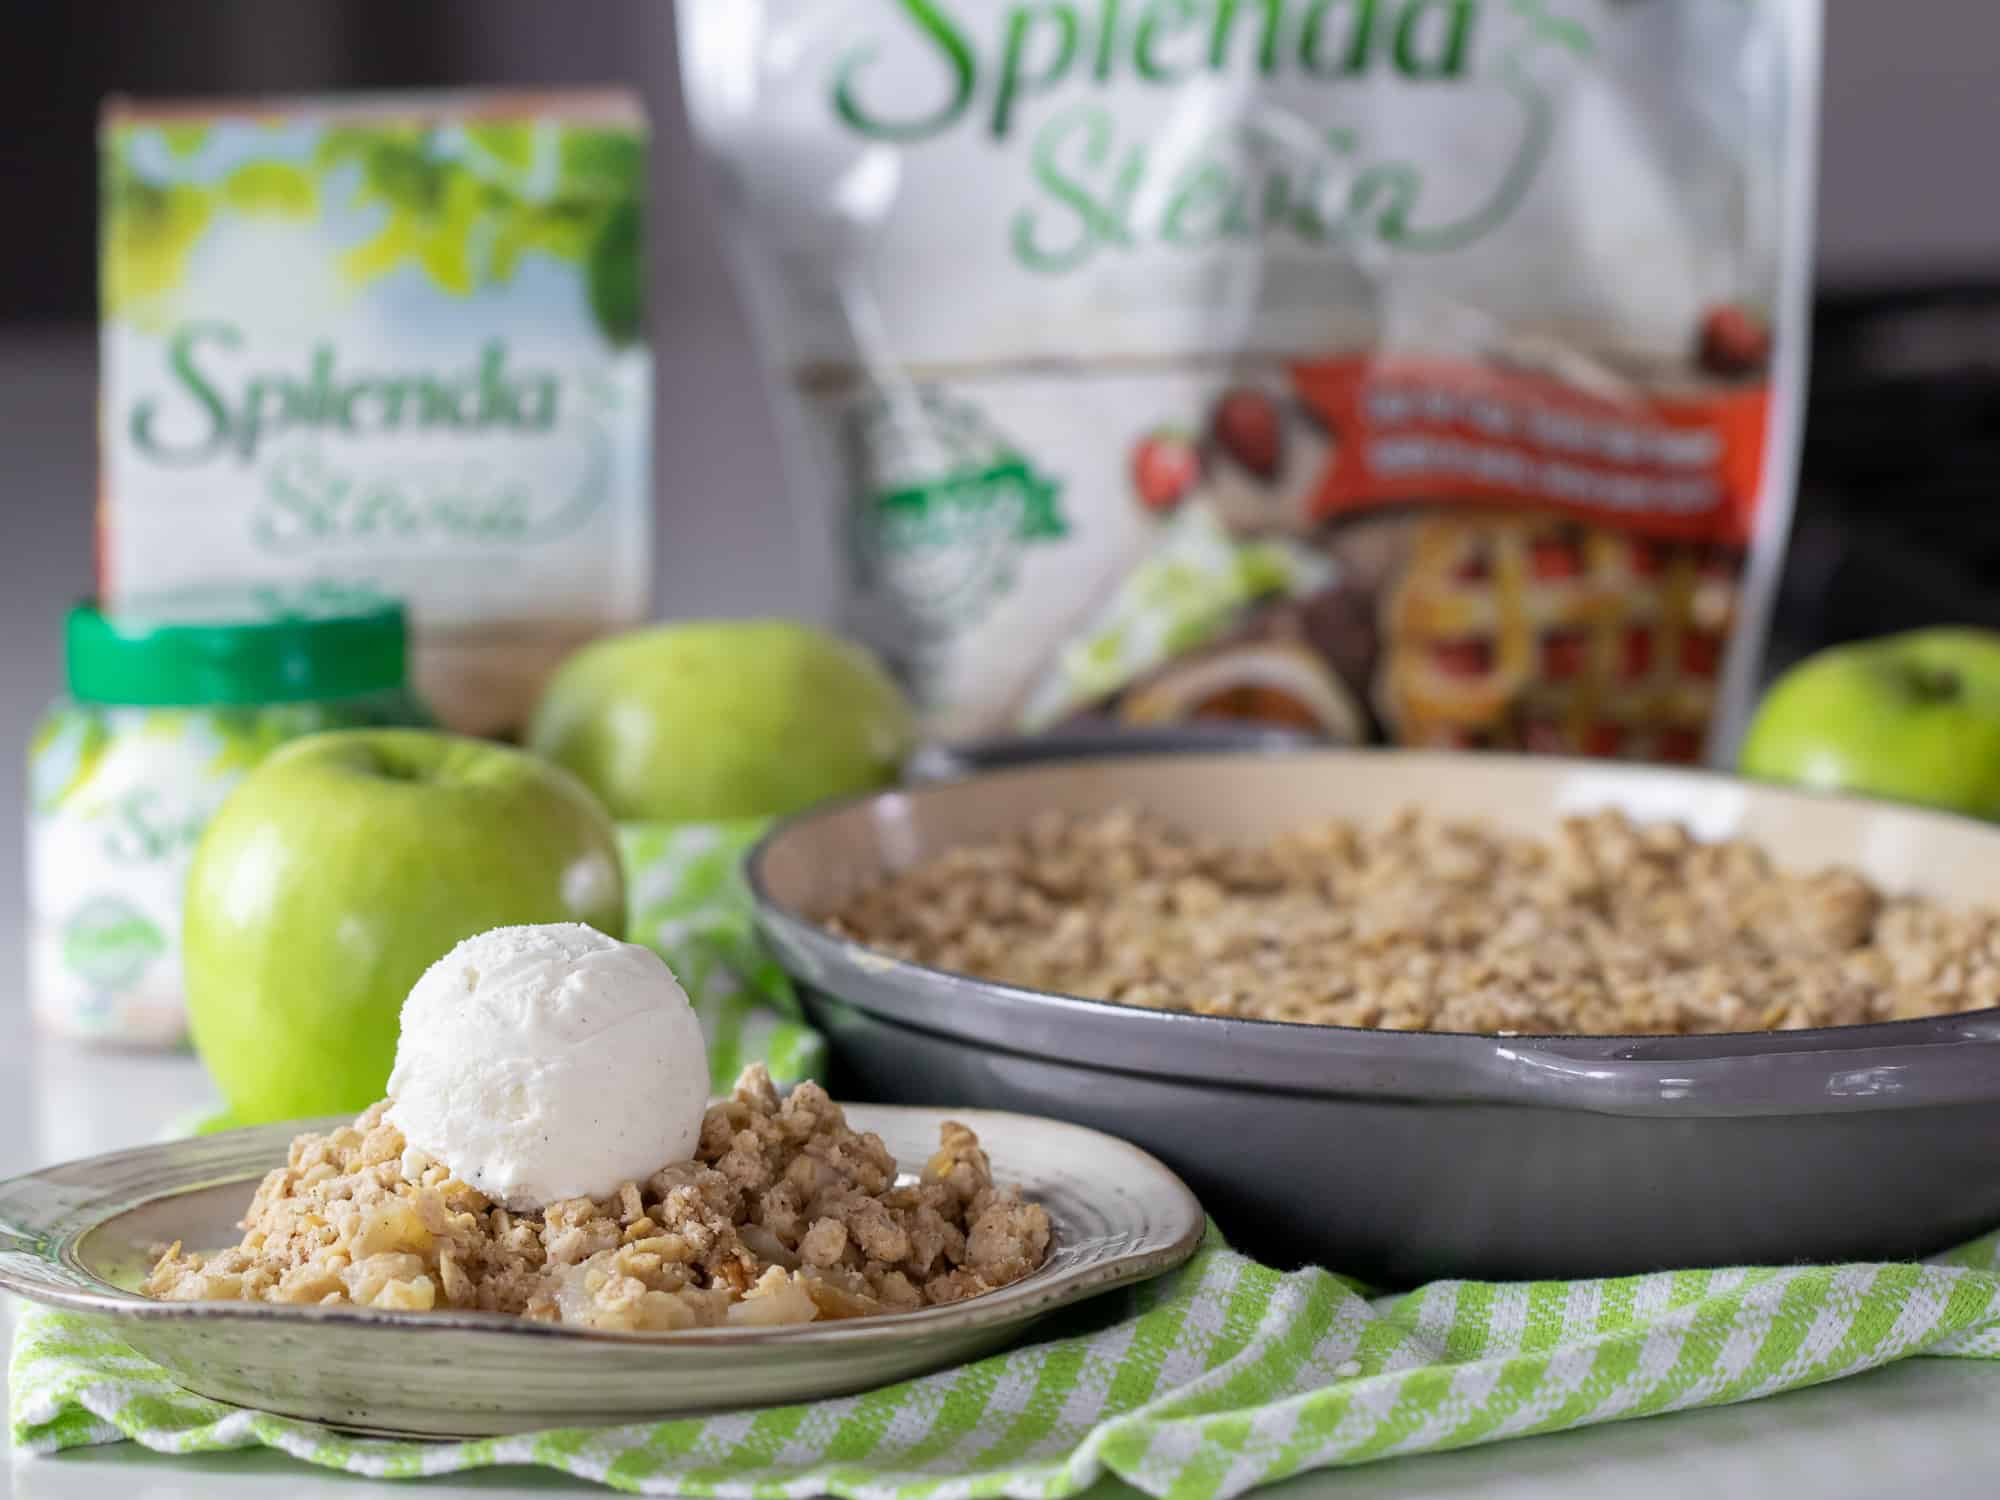 This apple crumble is perfect for Canadian Thanksgiving.